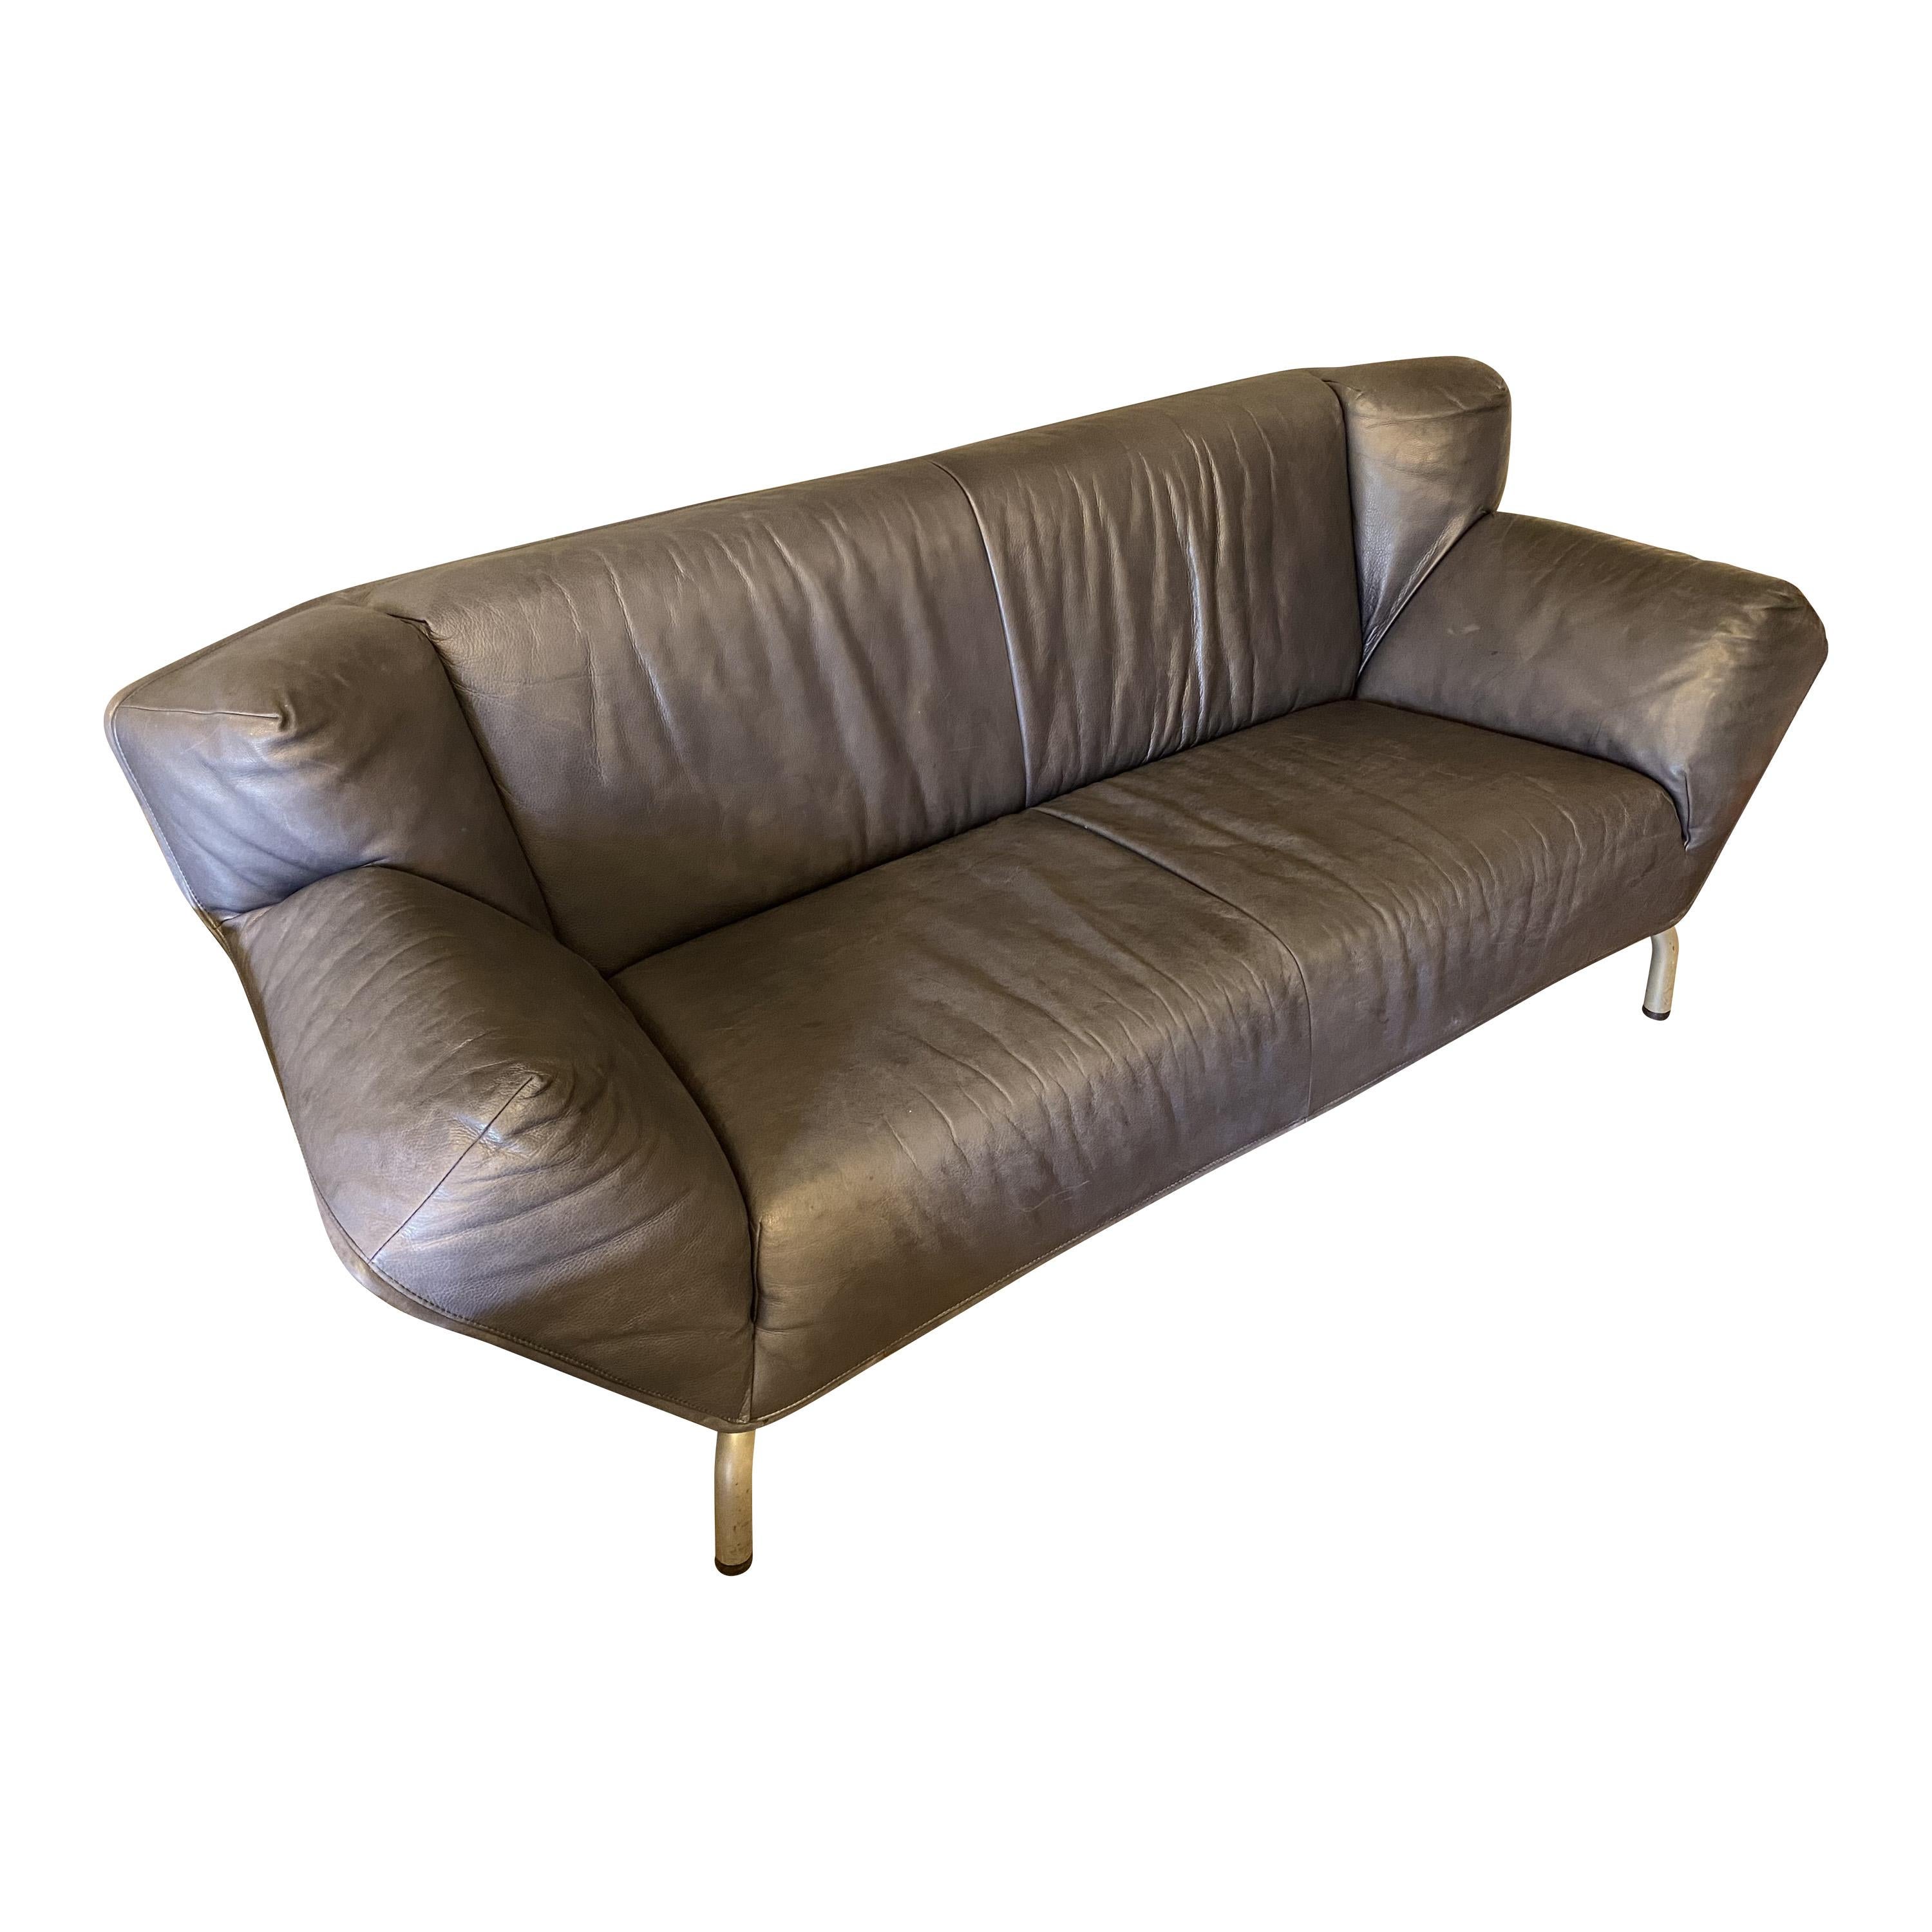 Post-Modern Gerard van den Berg Leather Sofa, NL, 1970-80's, Two Available